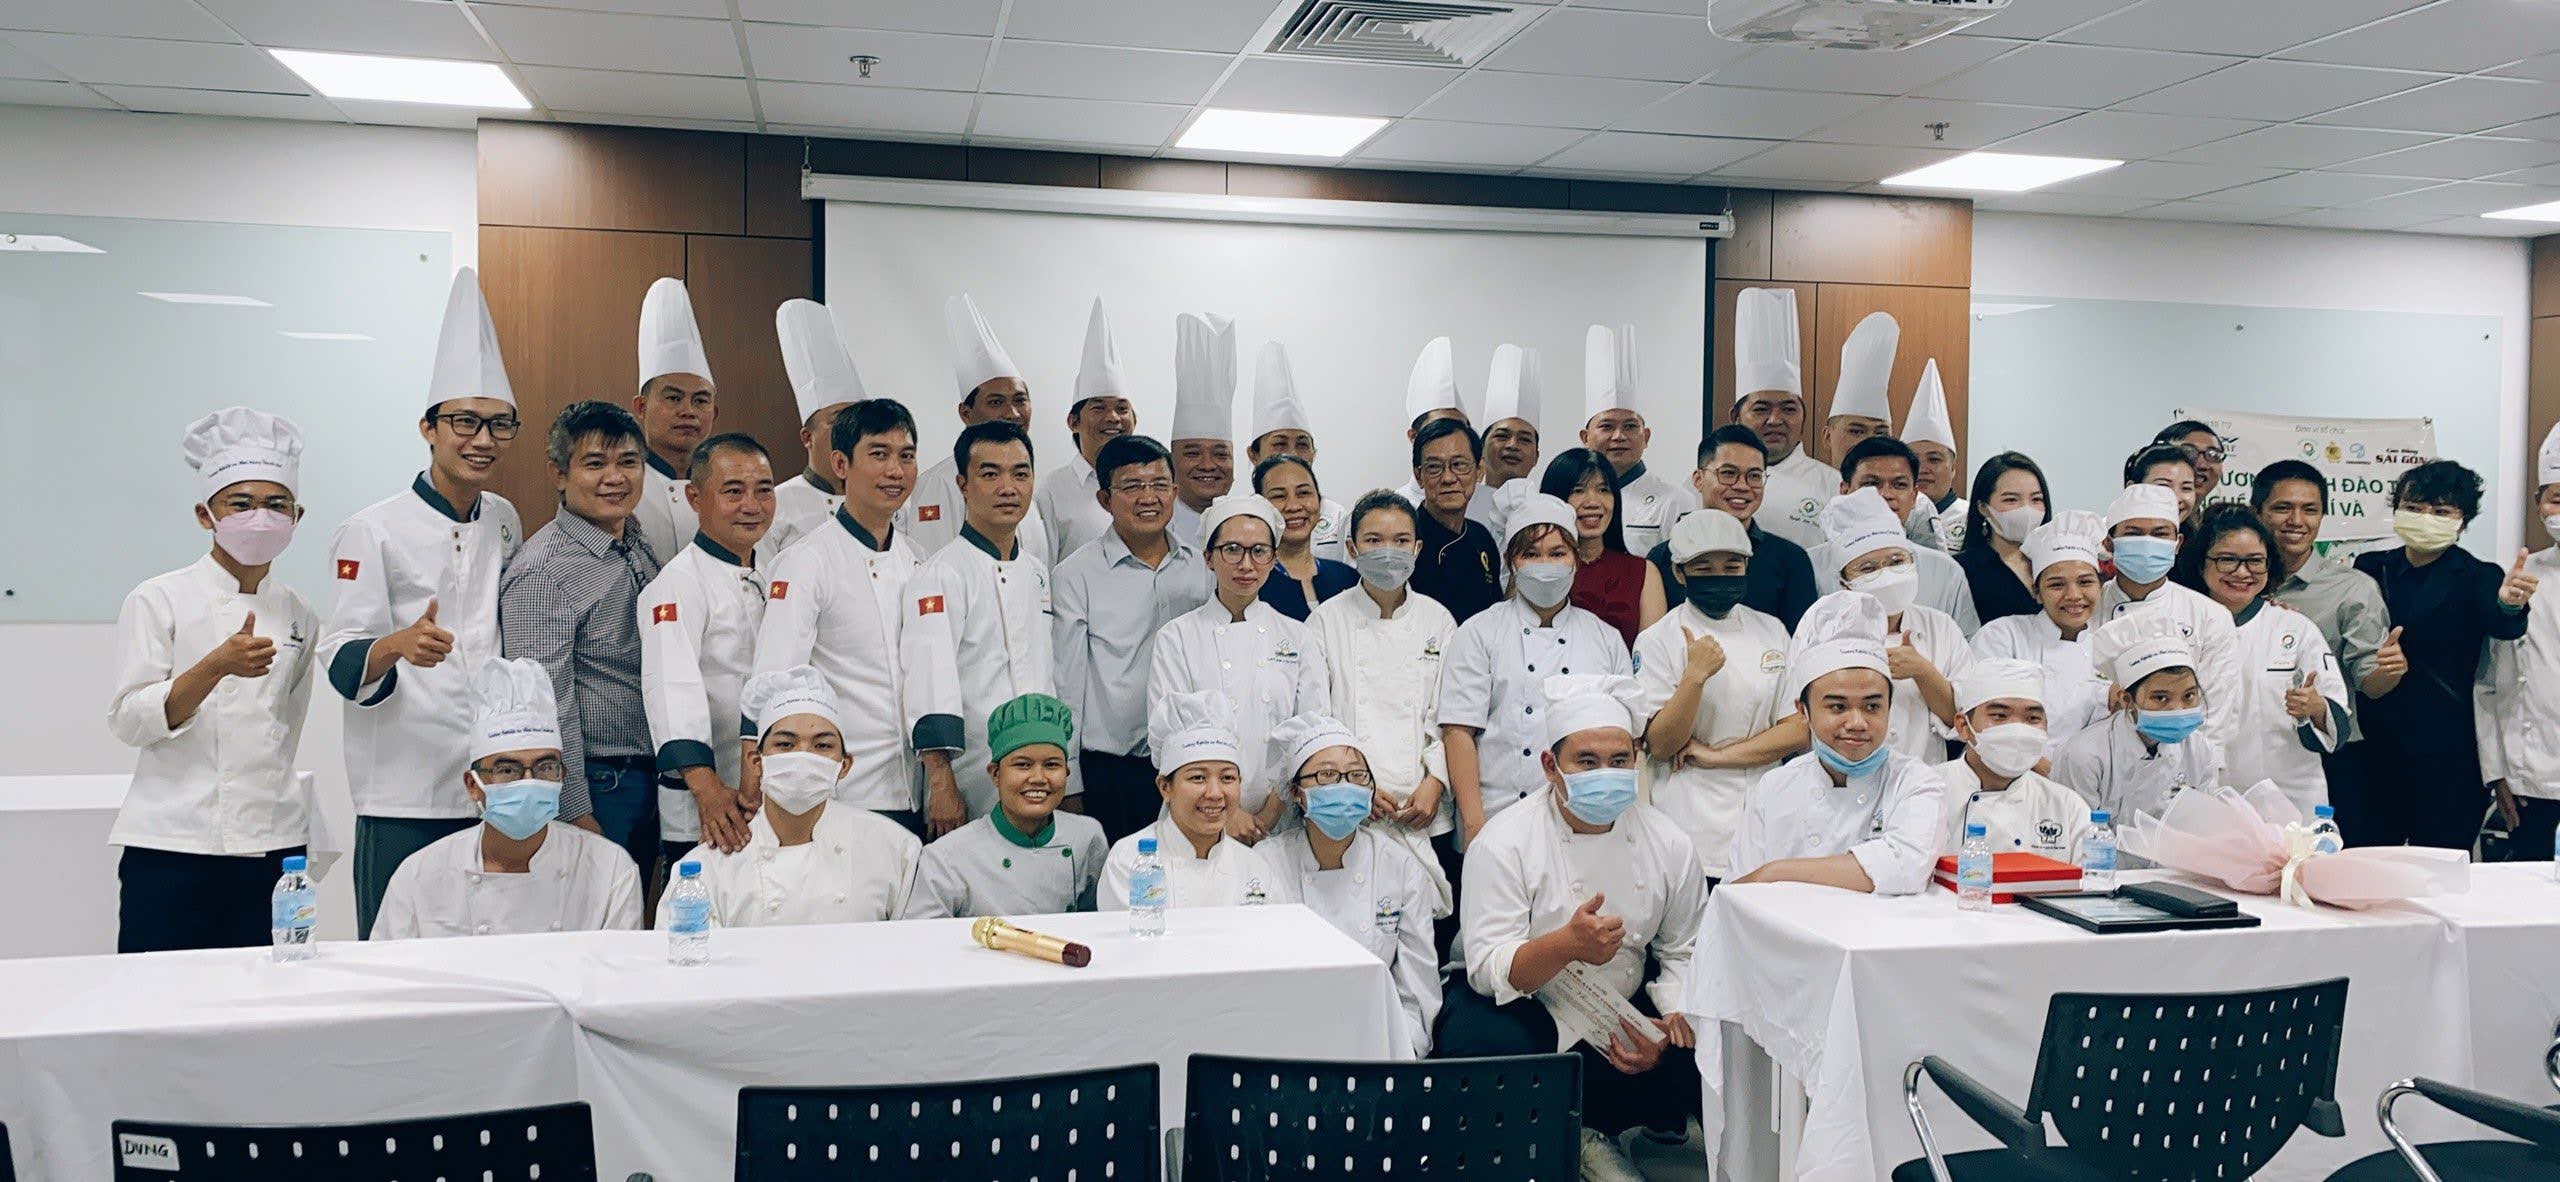 World Association of Master Chefs in Vietnam offers free training to disadvantaged learners